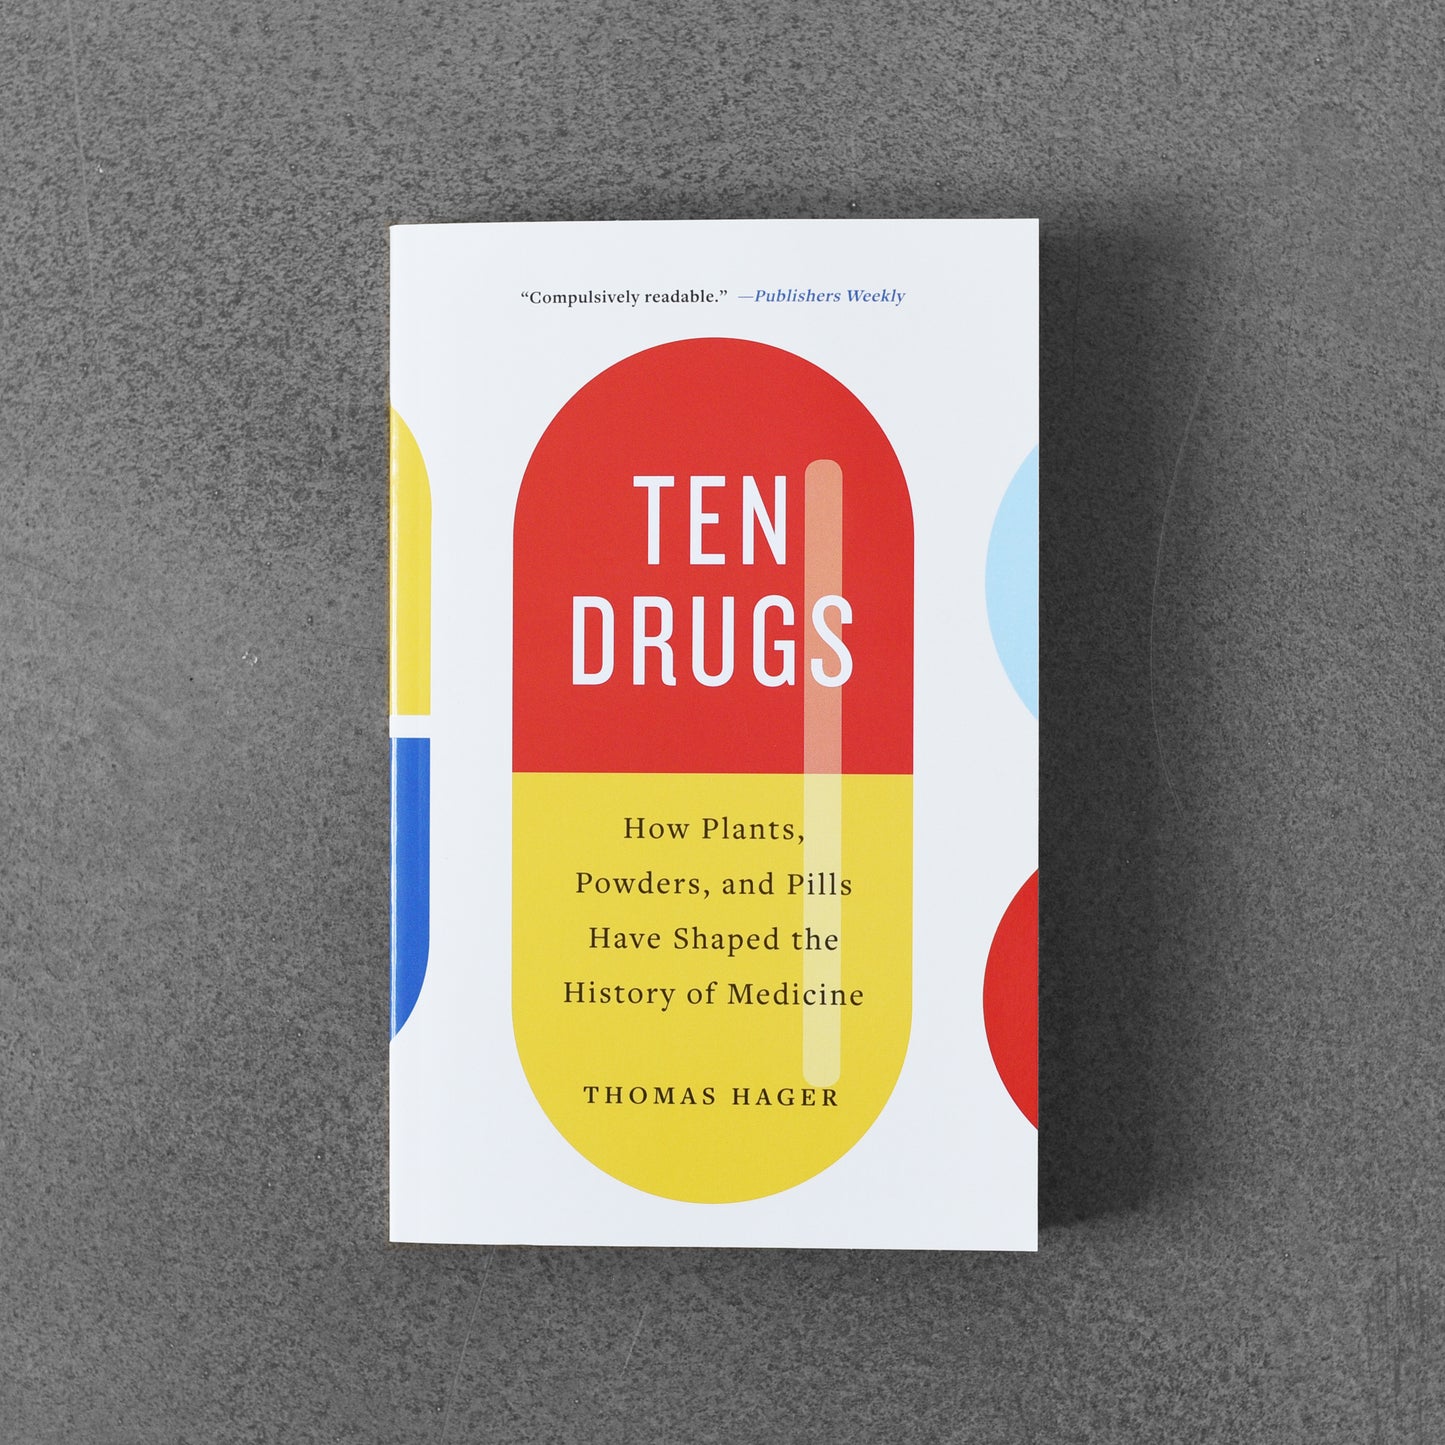 Ten Drugs: How Plants, Powders, and Pills Have Shaped the History of Medicine - Thomas Hager